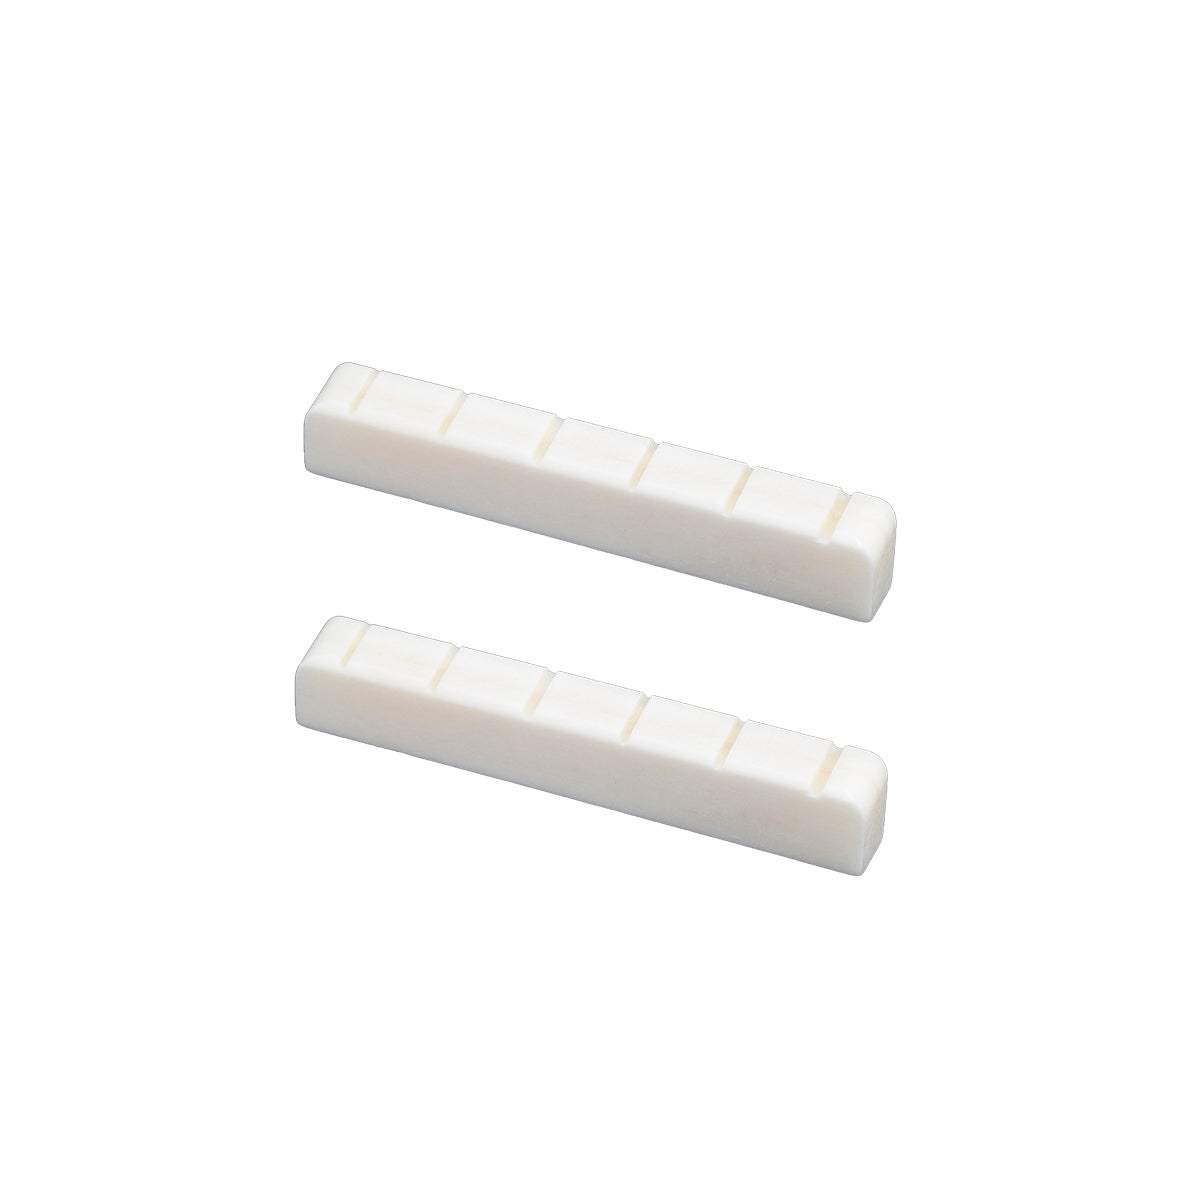 Musiclily Slotted 6 String Classical Guitar Bone Nut,DJ-03 52x6x9/8.5mm (2 Pieces)